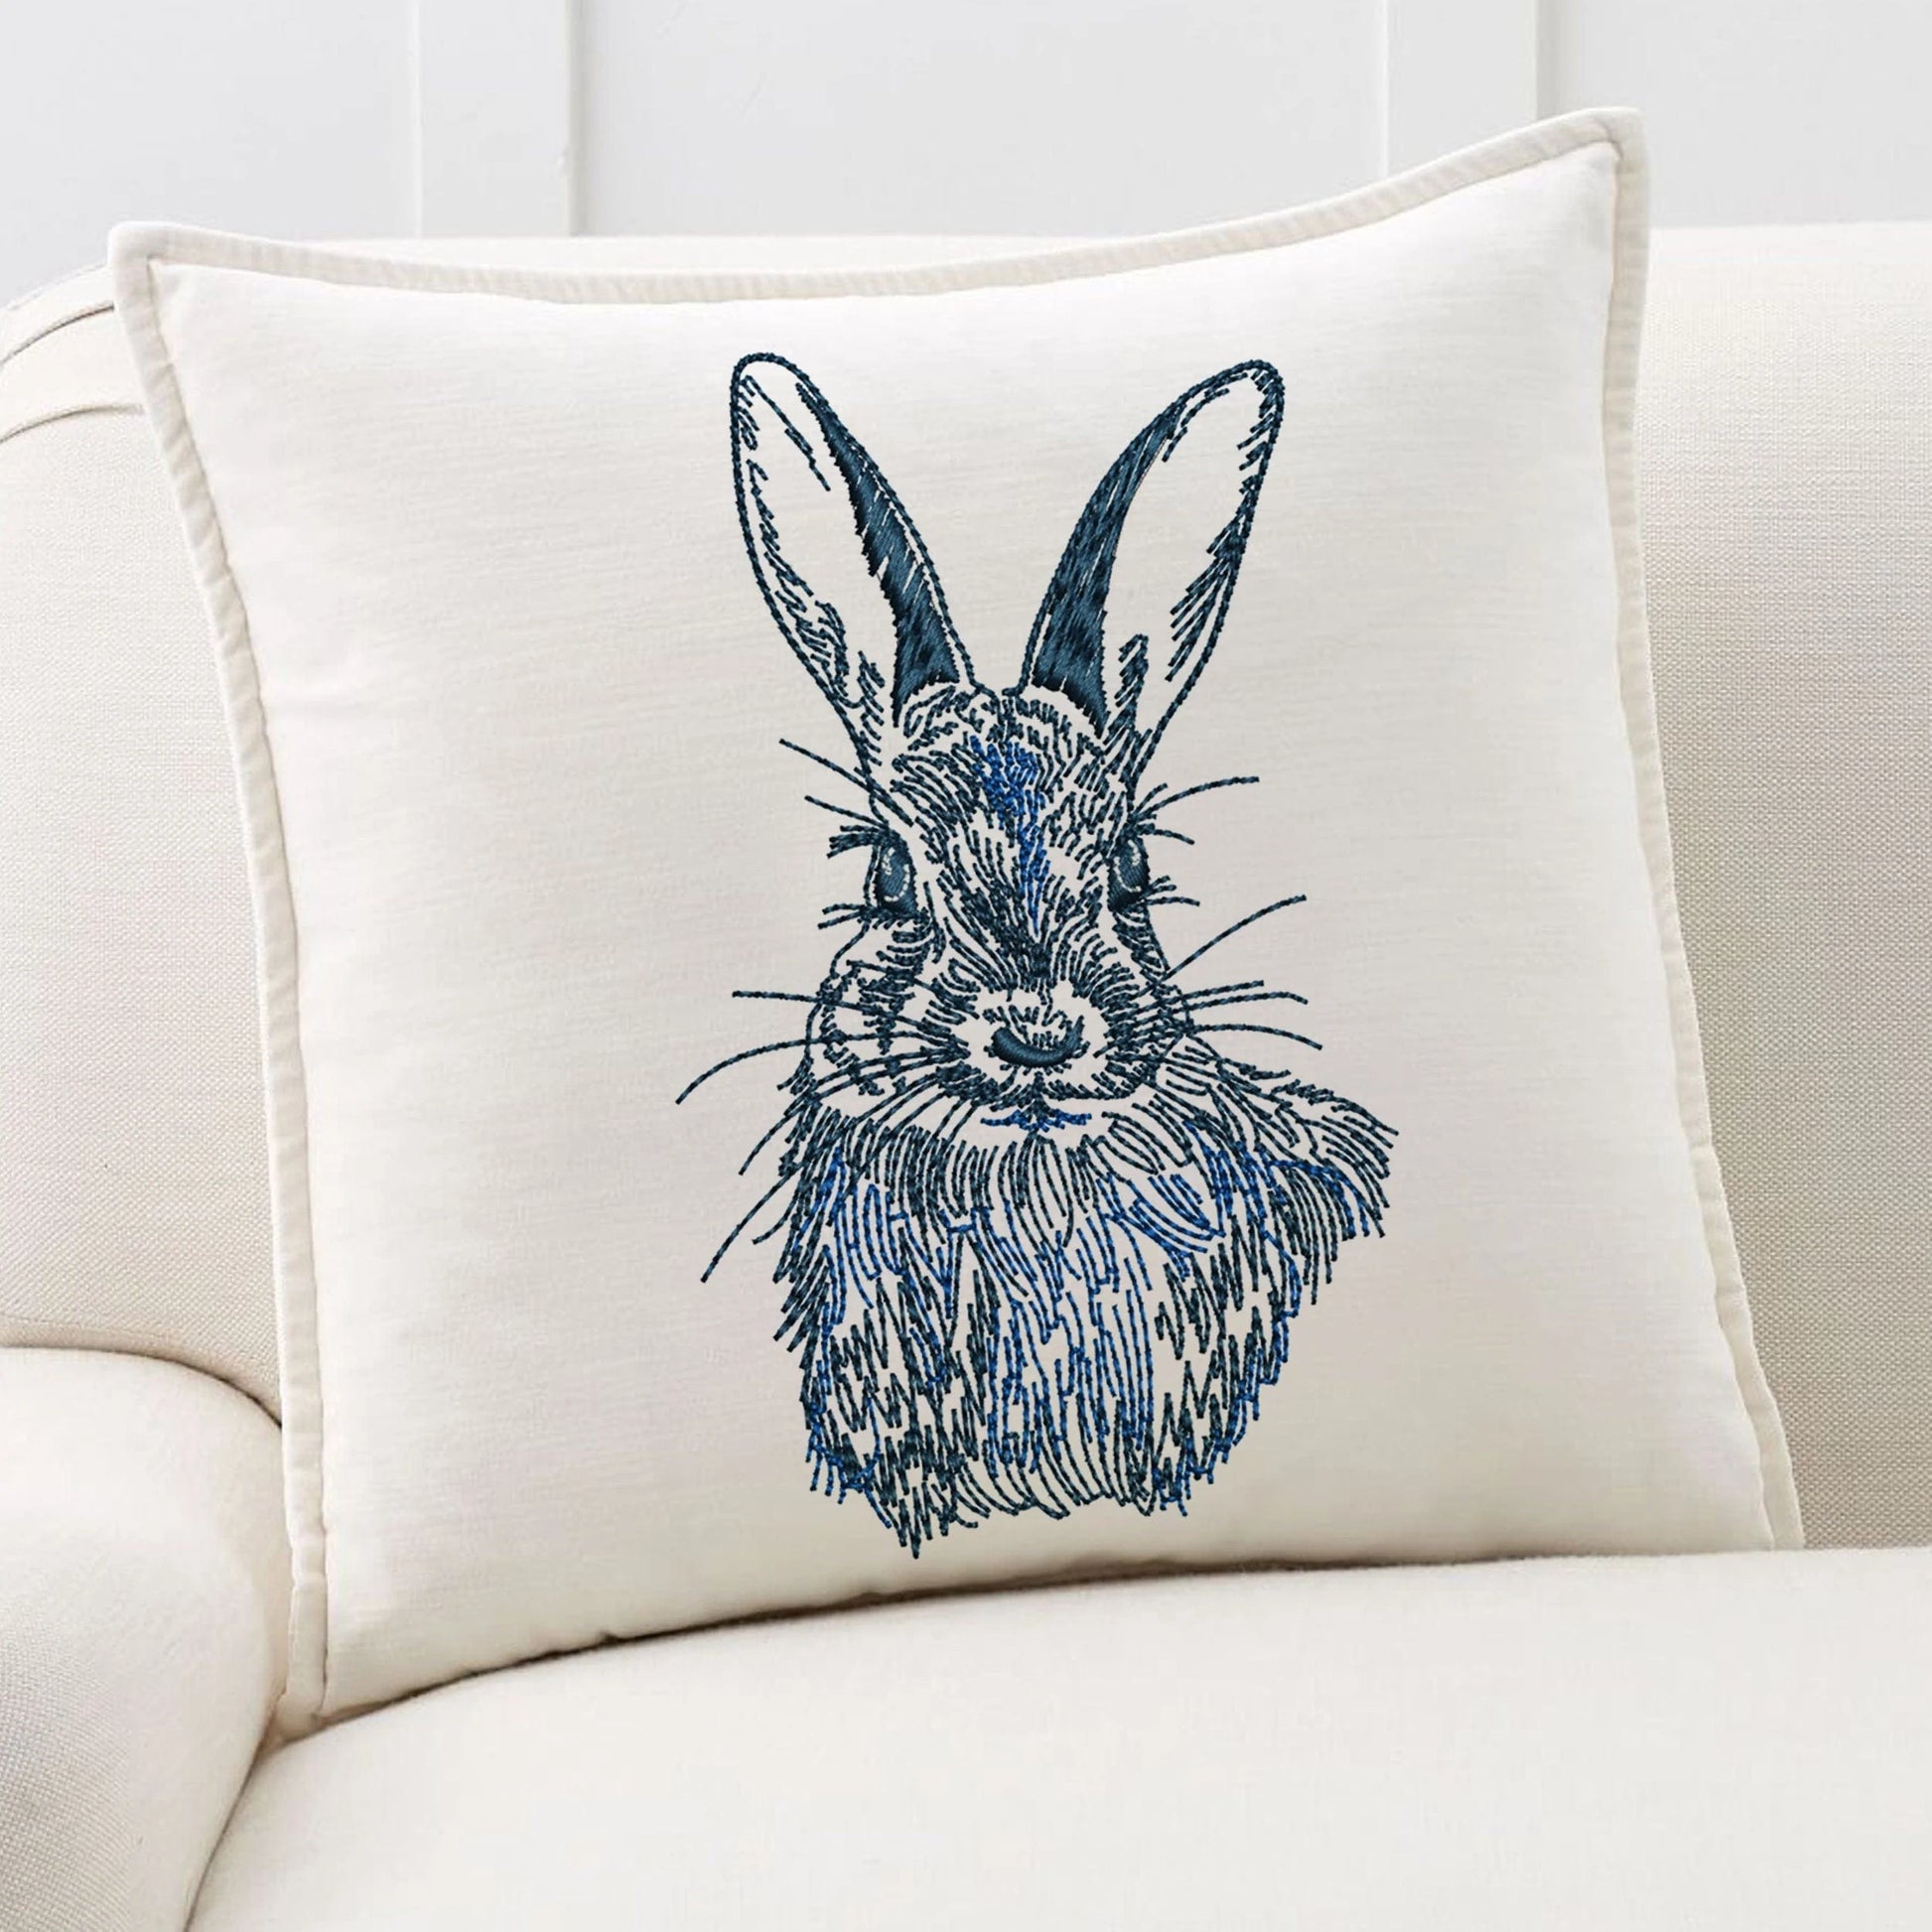 Natural Easter Bunny Machine Embroidery Design on pillow